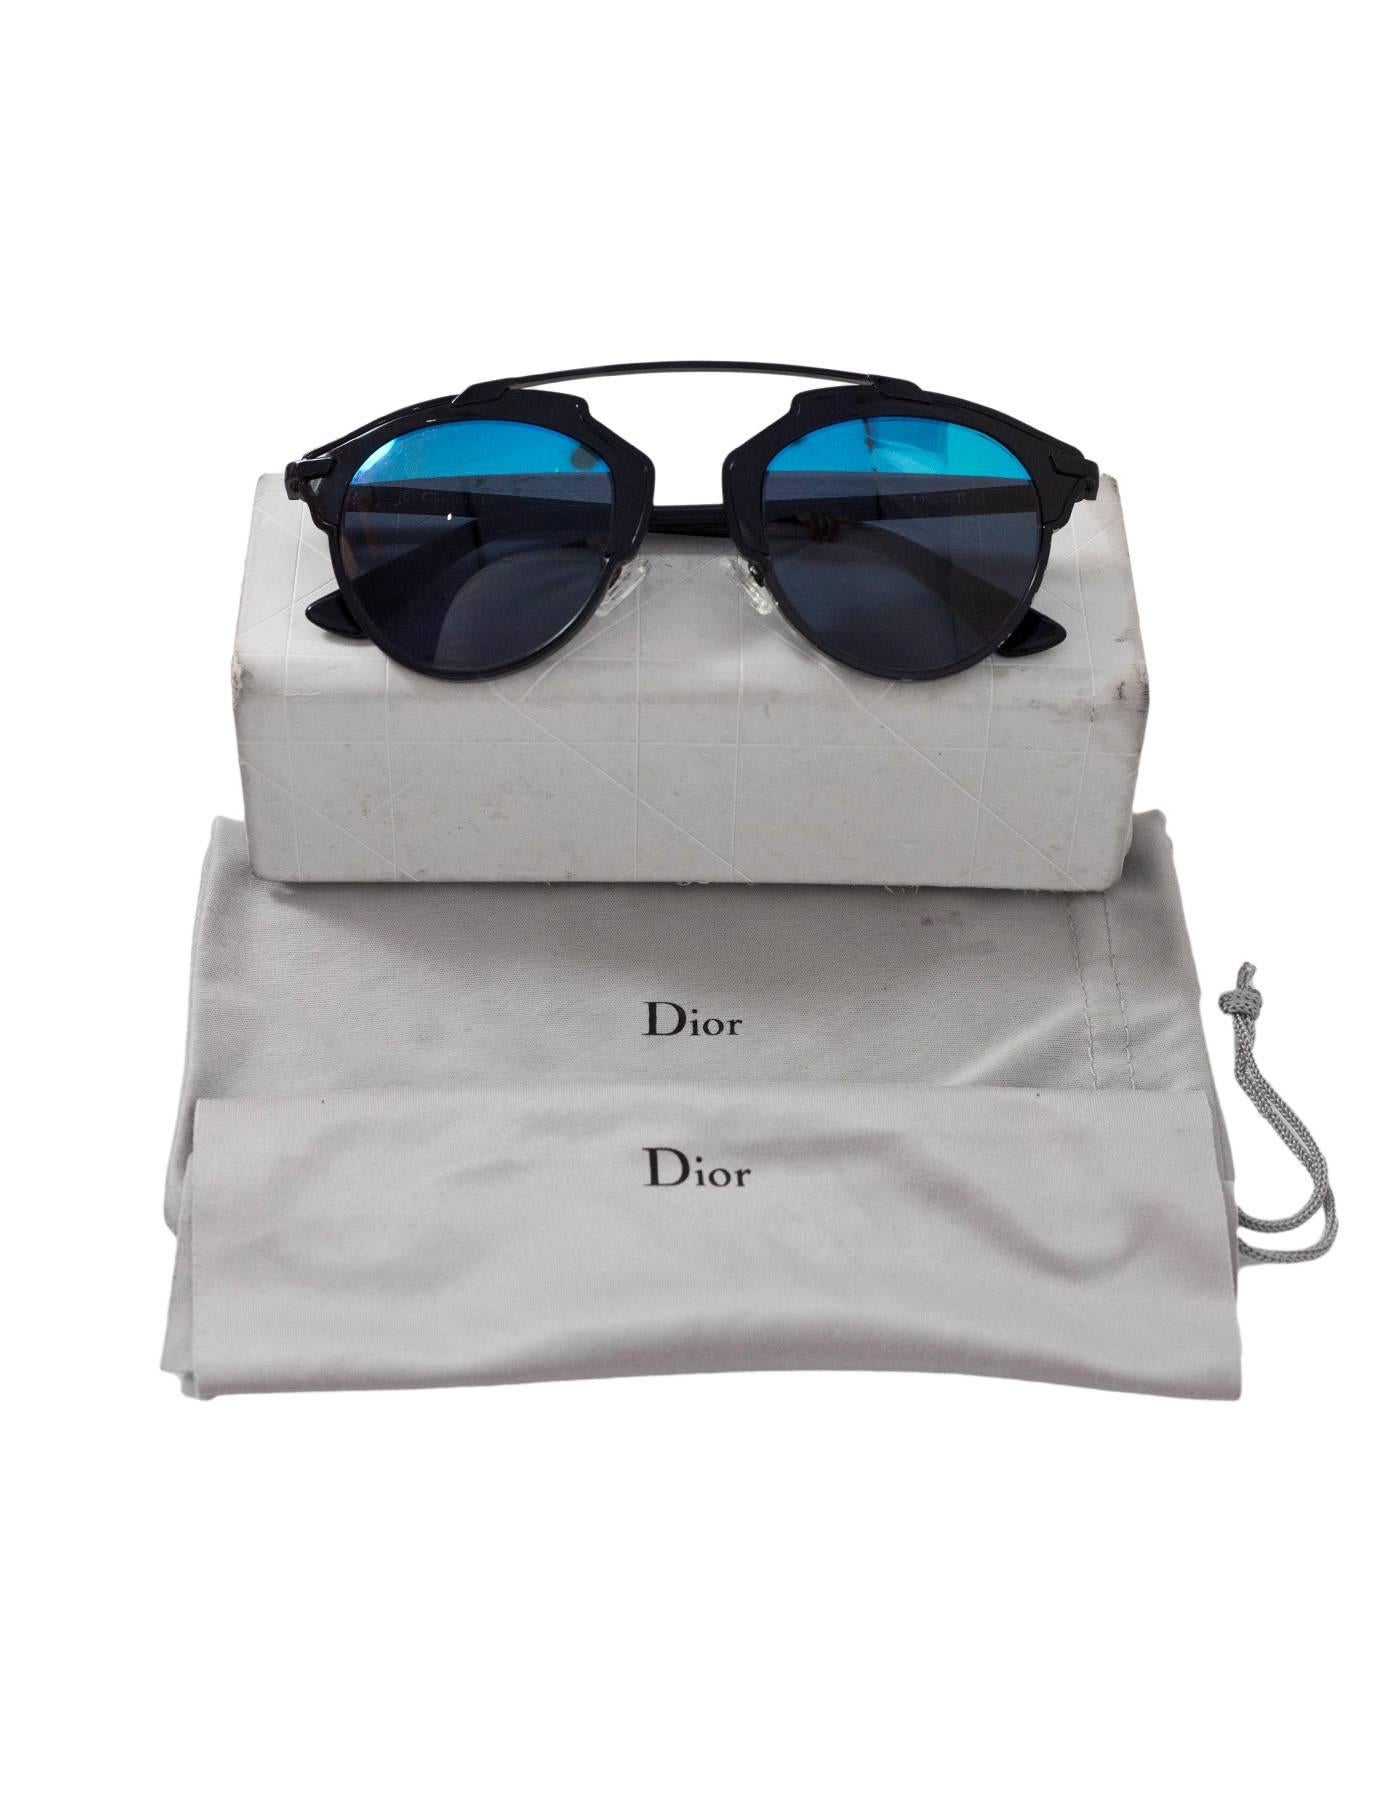 Women's Christian Dior Black & Blue So Real Sunglasses with Case